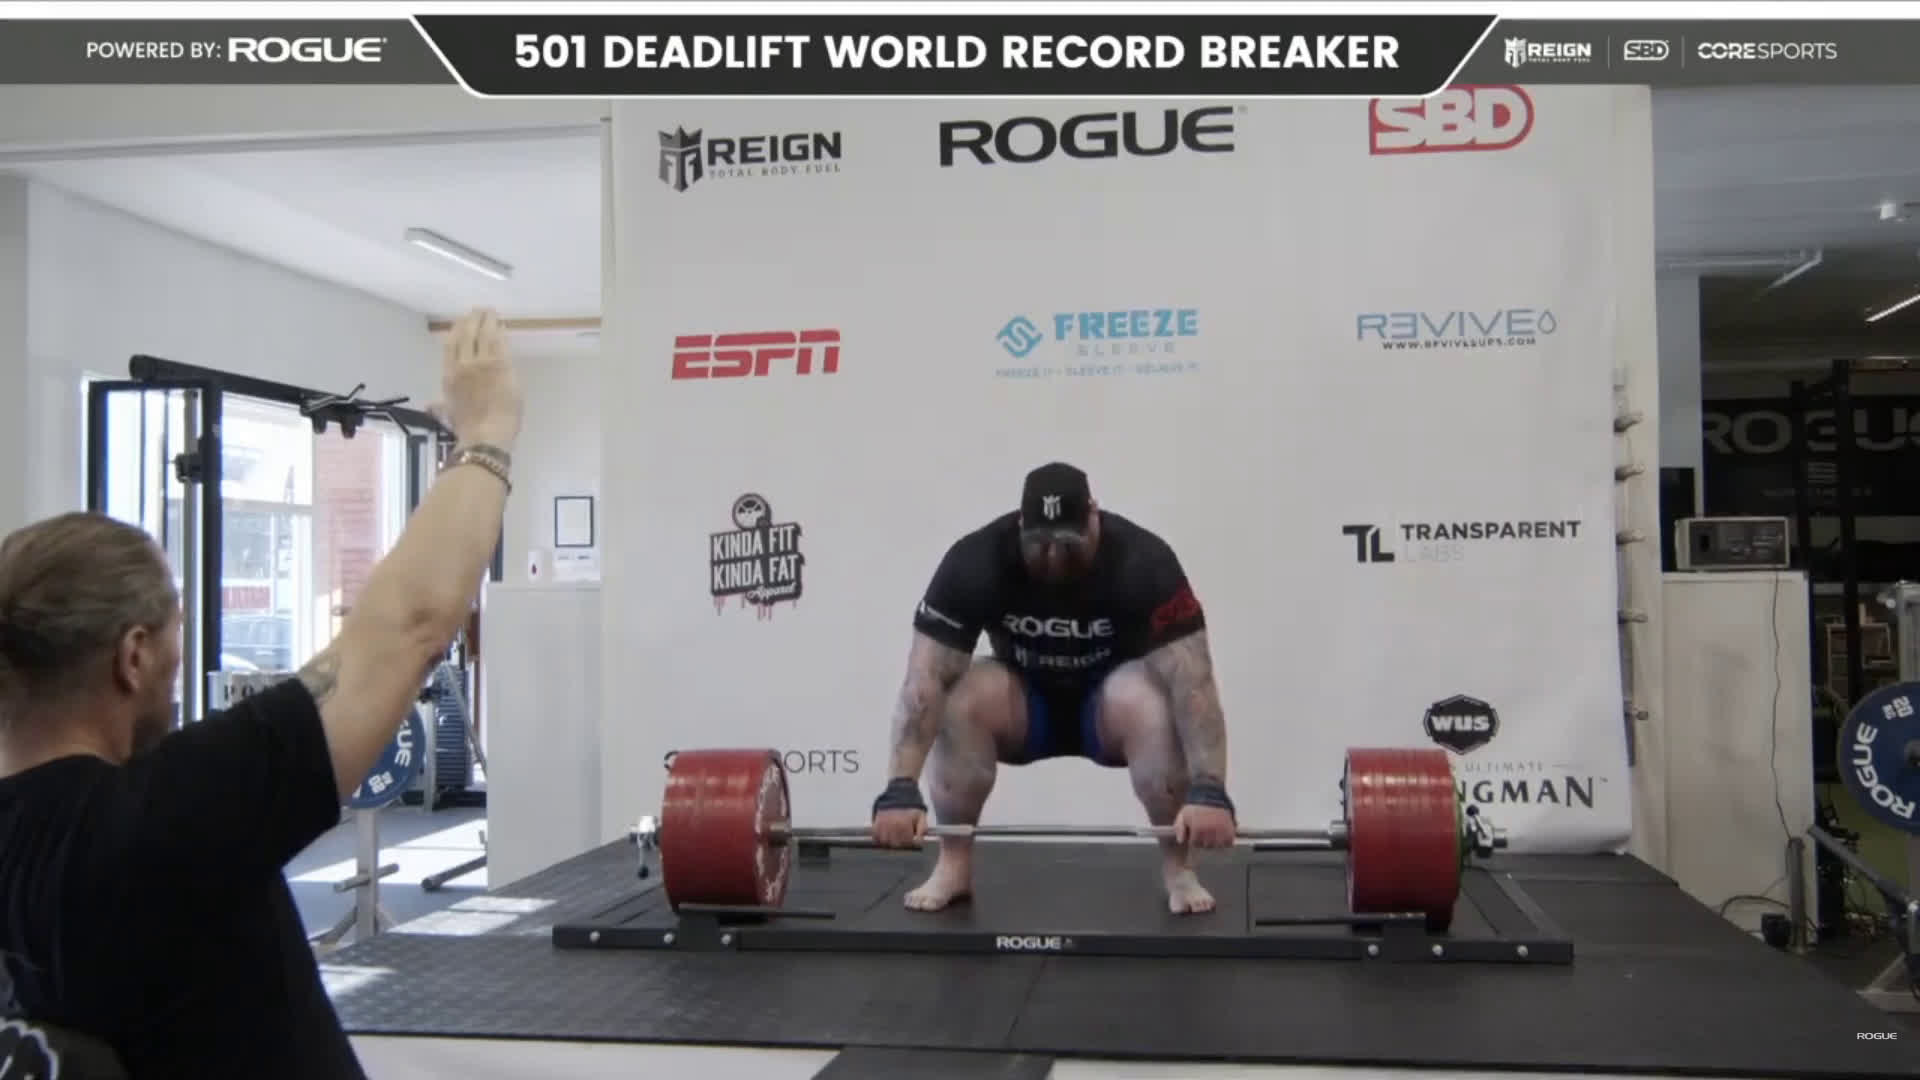 The Mountain deadlift world record: Game of Thrones, Hafthor